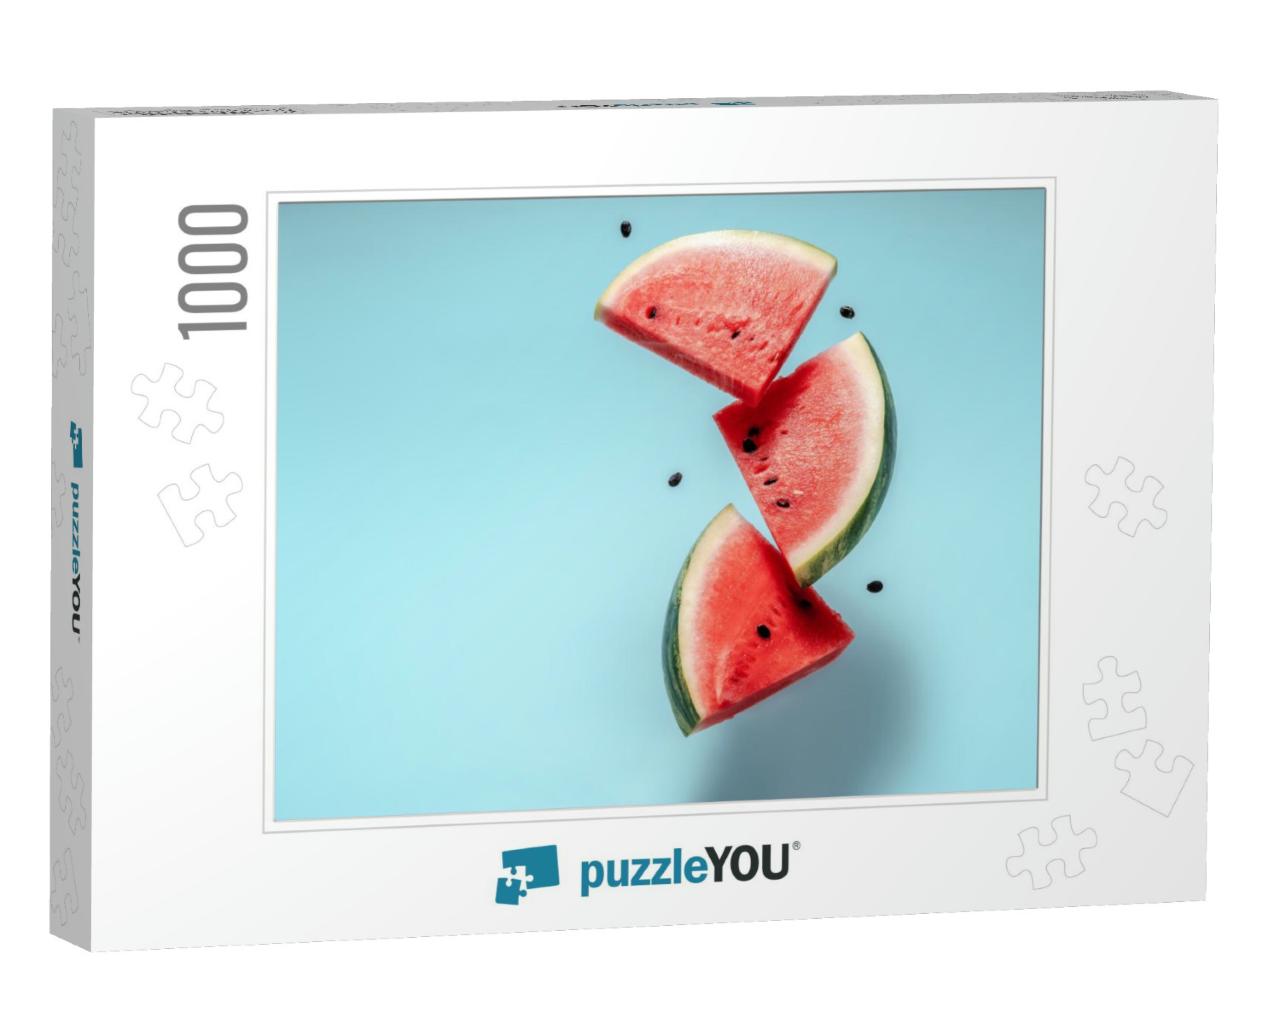 Watermelon Slice Falling on Pastel Background. Floating F... Jigsaw Puzzle with 1000 pieces